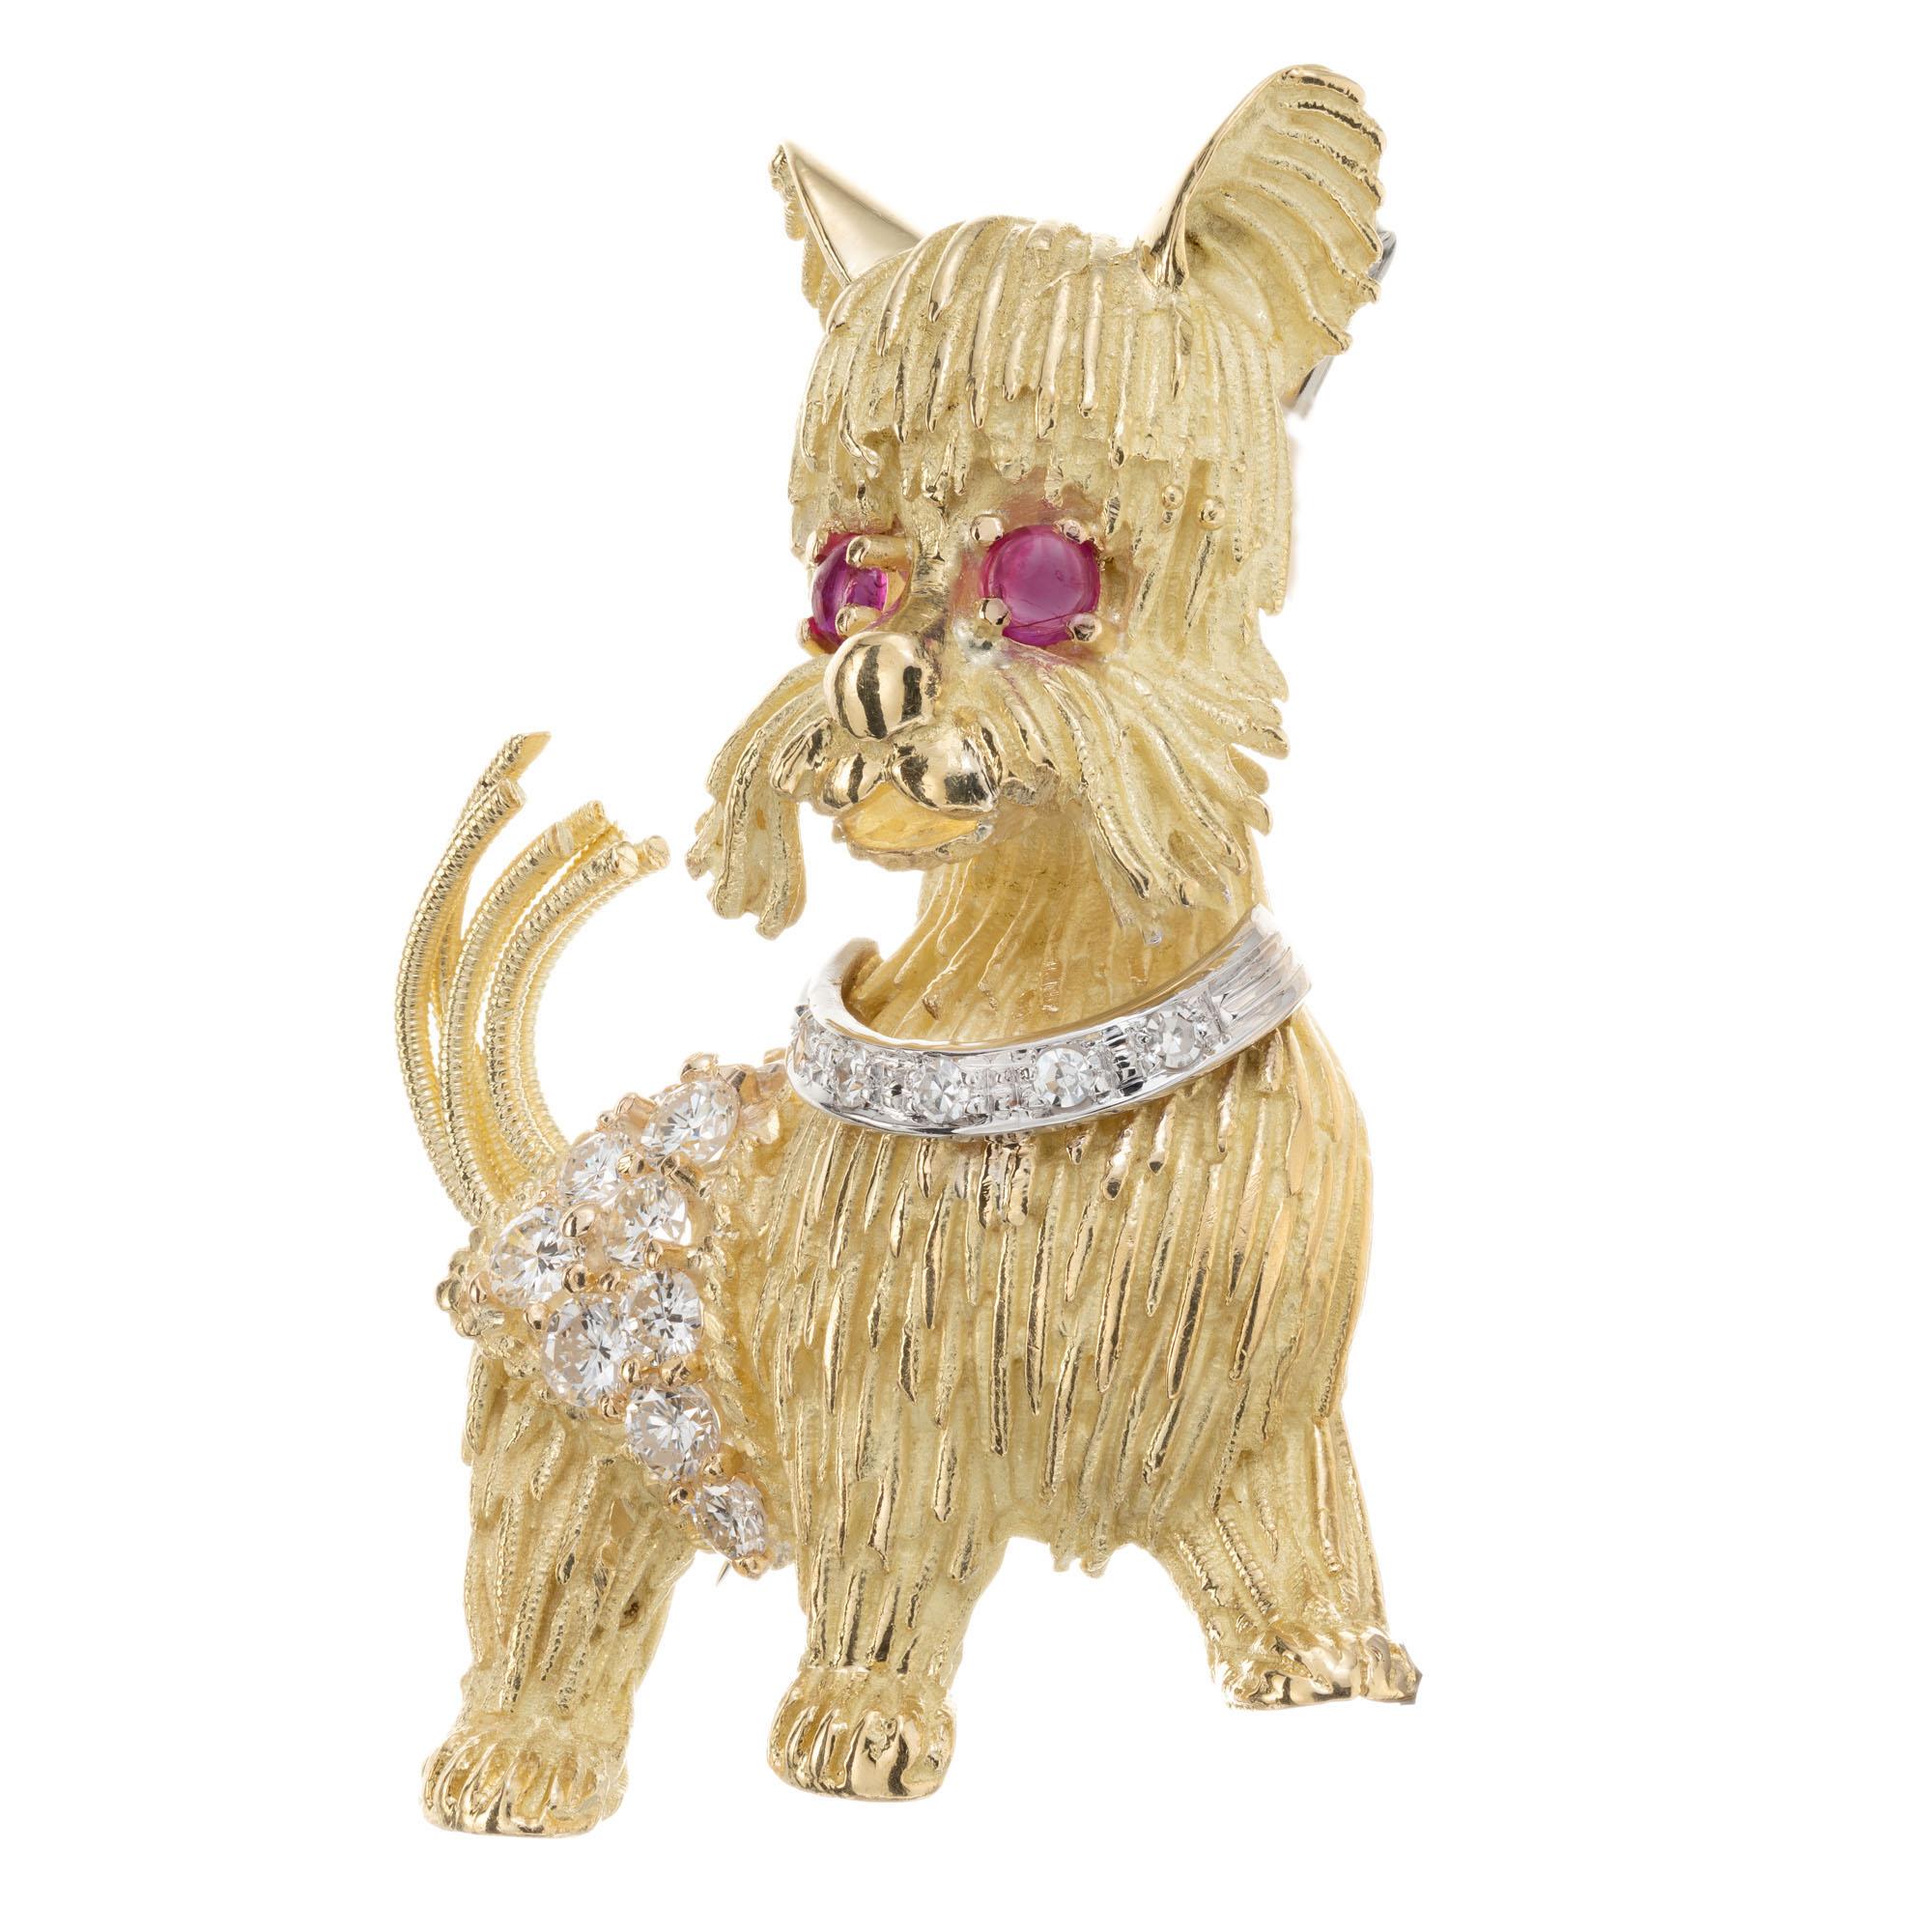 18k yellow gold Yorkie brooch, with ruby eyes and 17 round brilliant cut accent diamonds. Signed HR.

17 round brilliant cut diamonds, G VS-SI approx. .70cts
2 round cabochon red rubies, approx. .12cts
18k yellow gold
18k white gold 
Stamped: K18